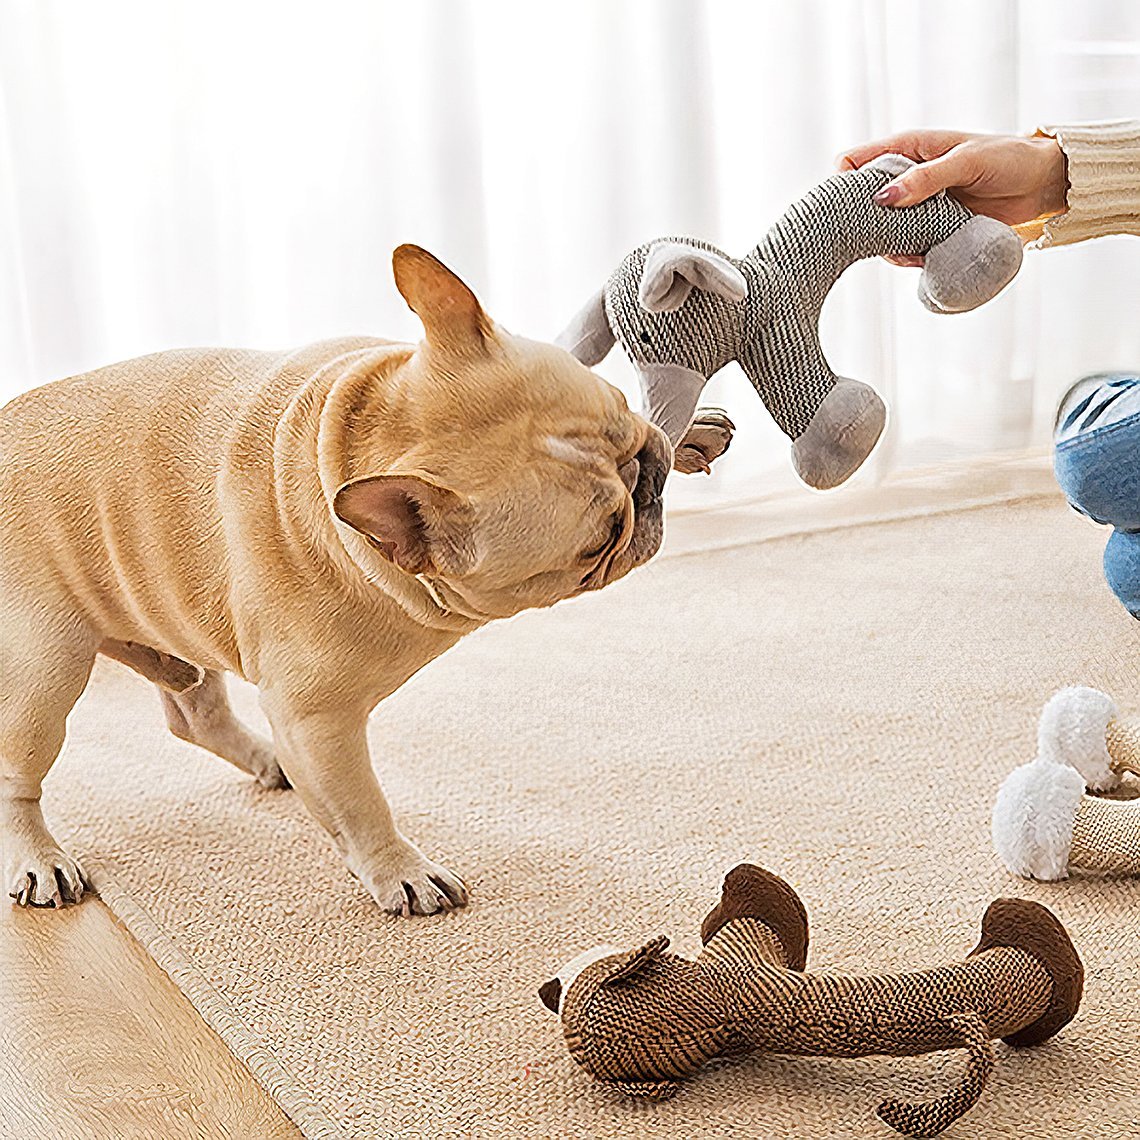 A woman holding an elephant dog toy in her hand and a pug biting this toy.